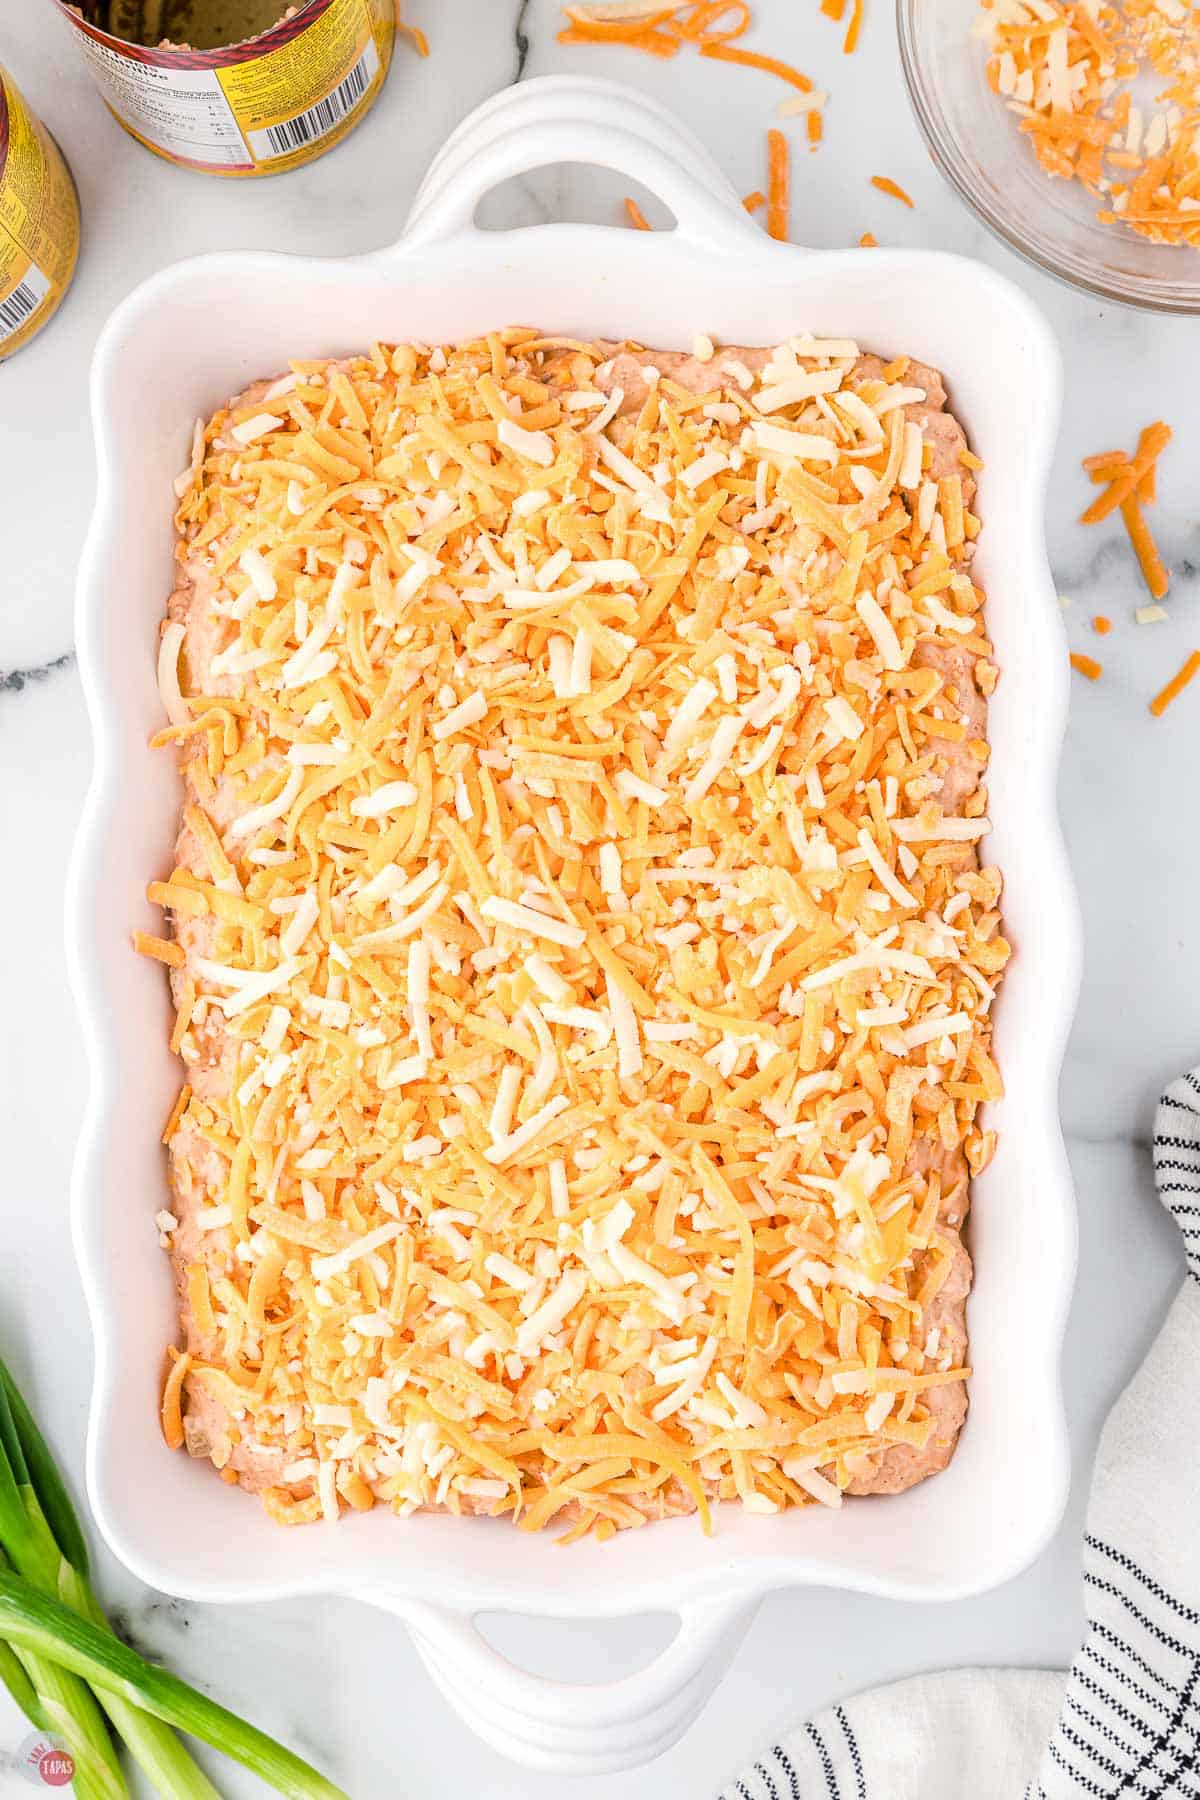 unbaked texas trash dip in a white dish